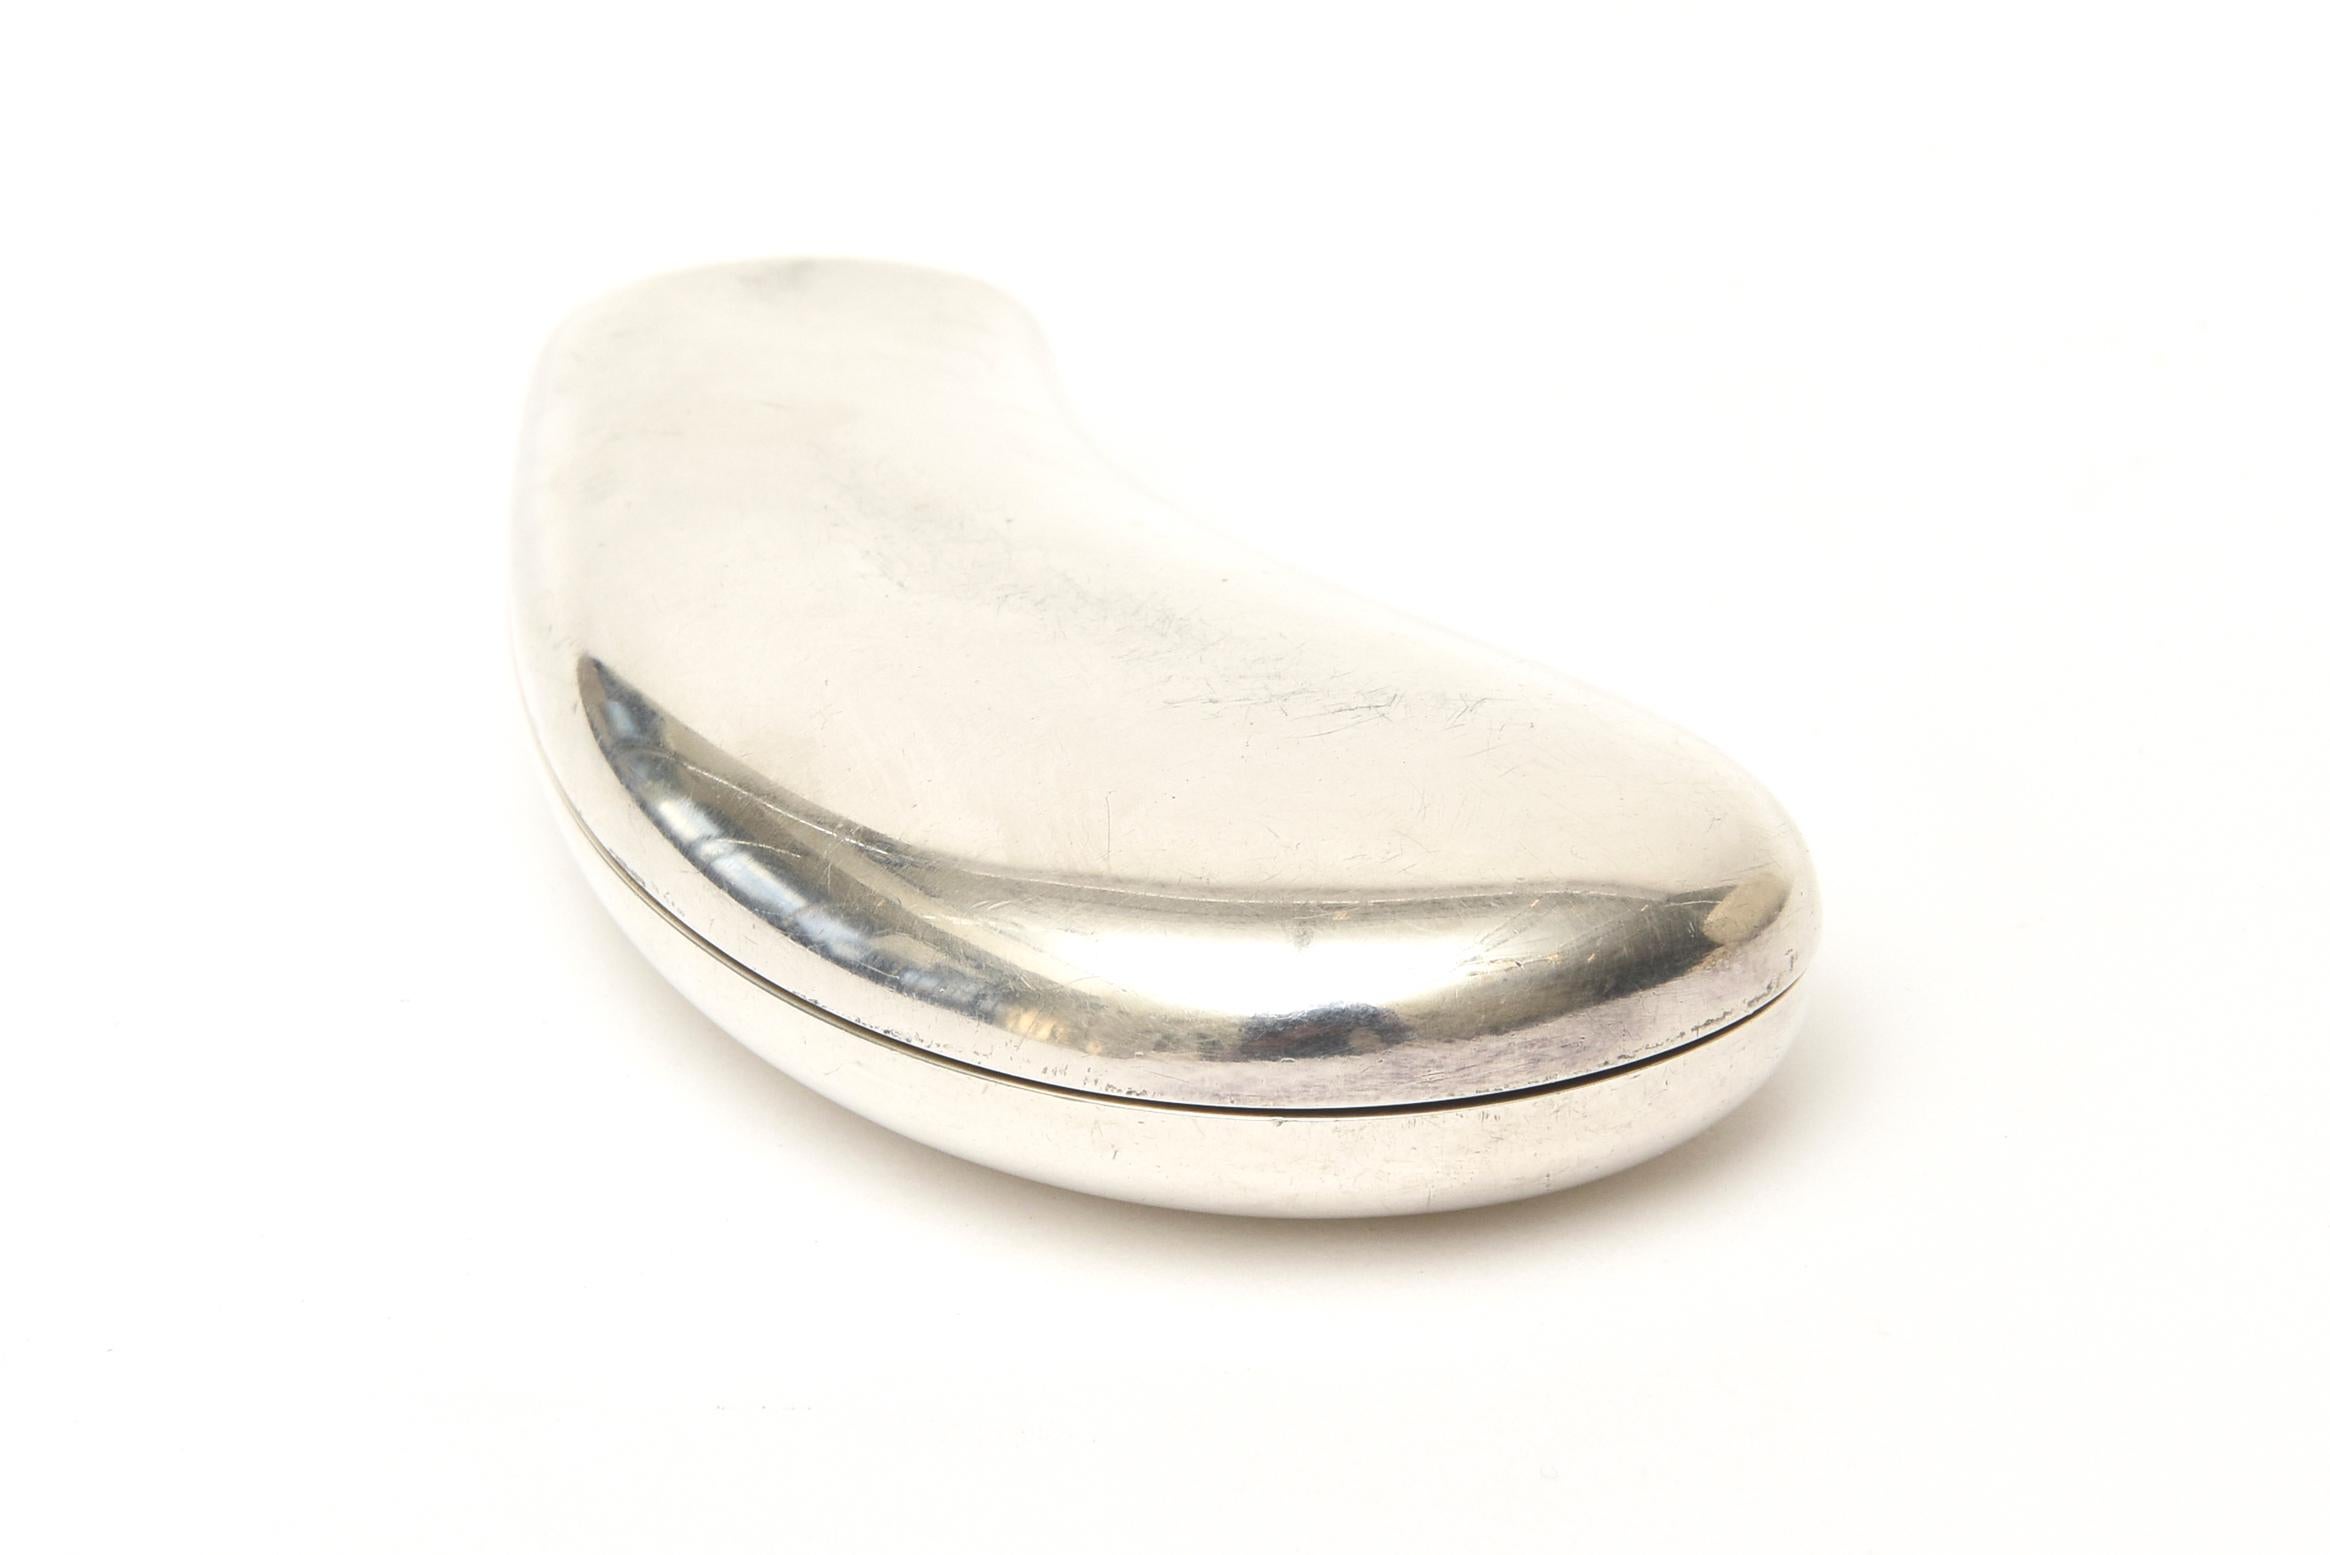 This unbelievable and fabulous signed vintage Italian Gucci sterling silver mirror compact is a piece of organic sculpture in a biomorphic bean form. What a great addition to the necessities of the interior of a chic handbag. It is in resemblance of